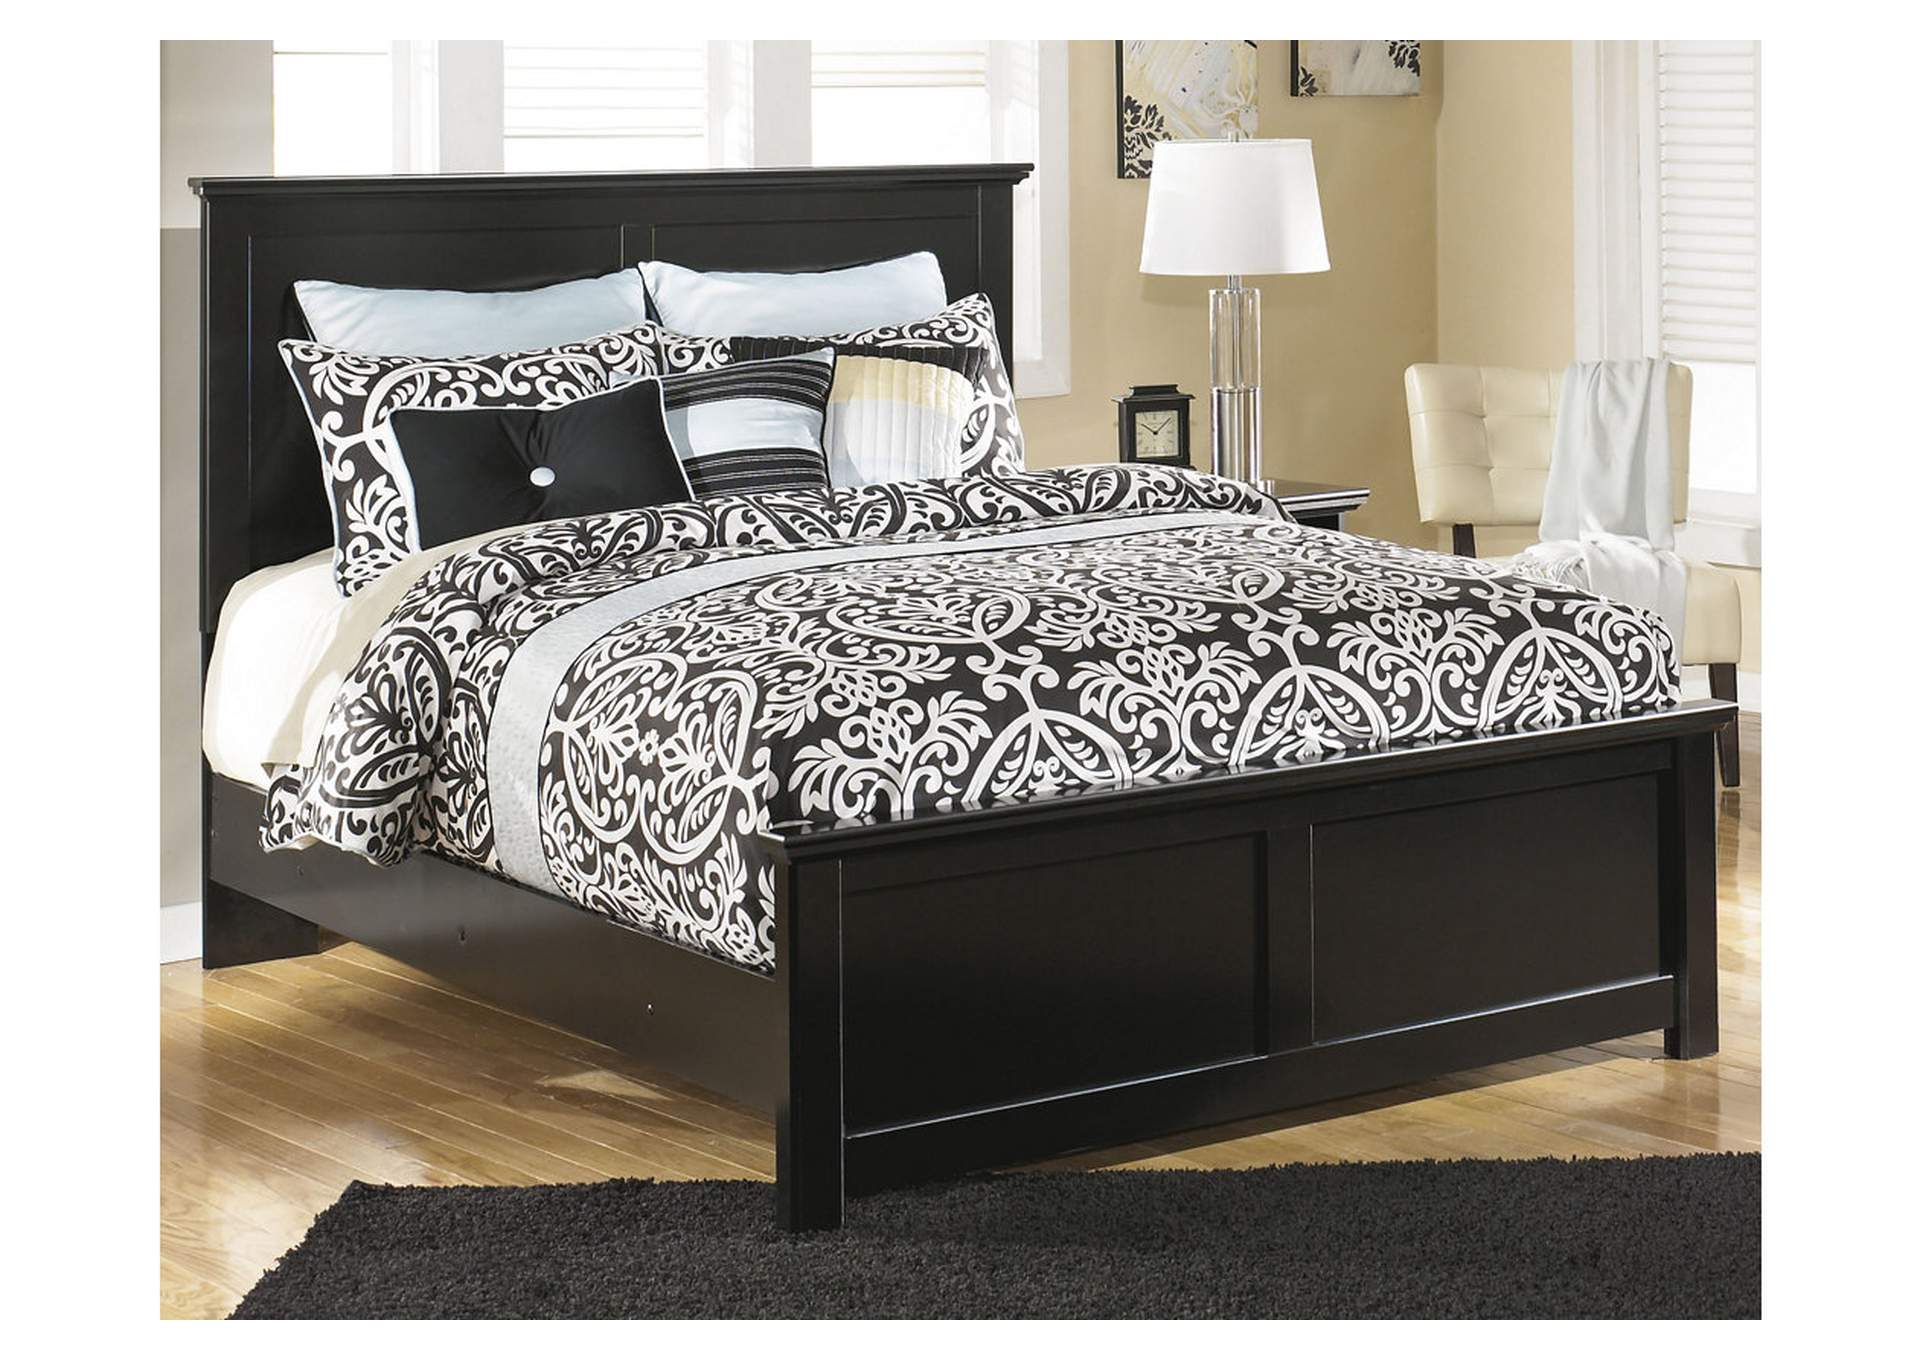 Maribel Queen Panel Bed and Chest,Signature Design By Ashley